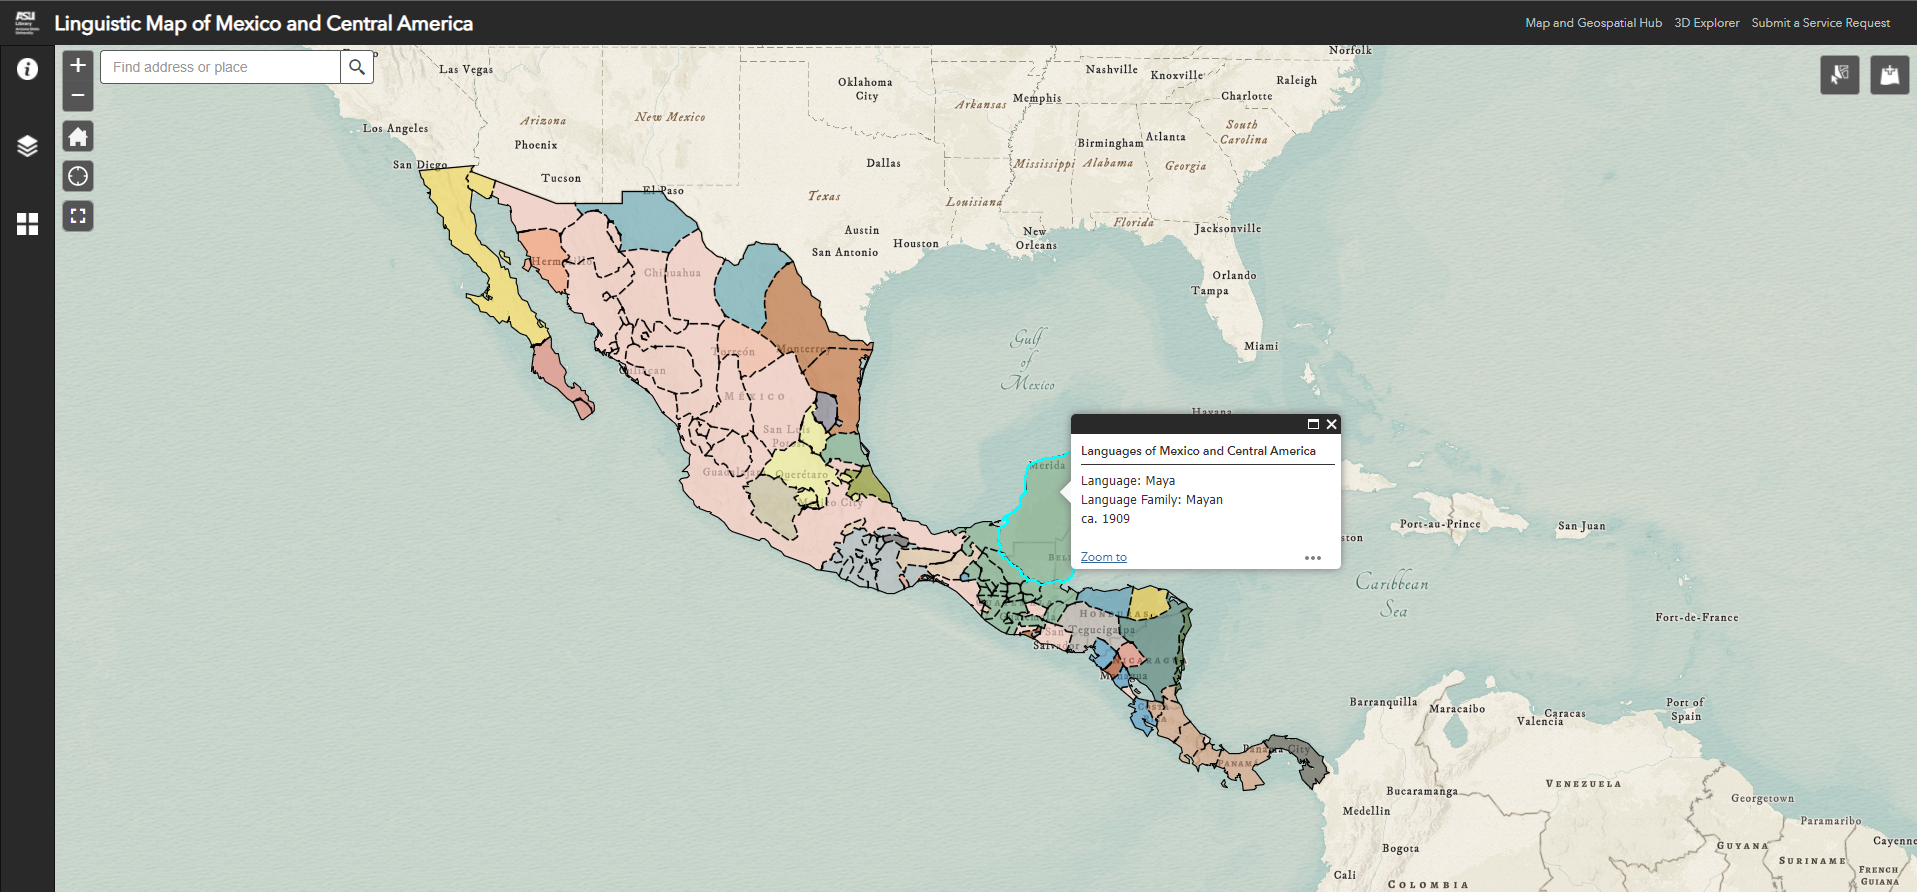 New Web App Linguistic Map Of Mexico And Central America ASU Library